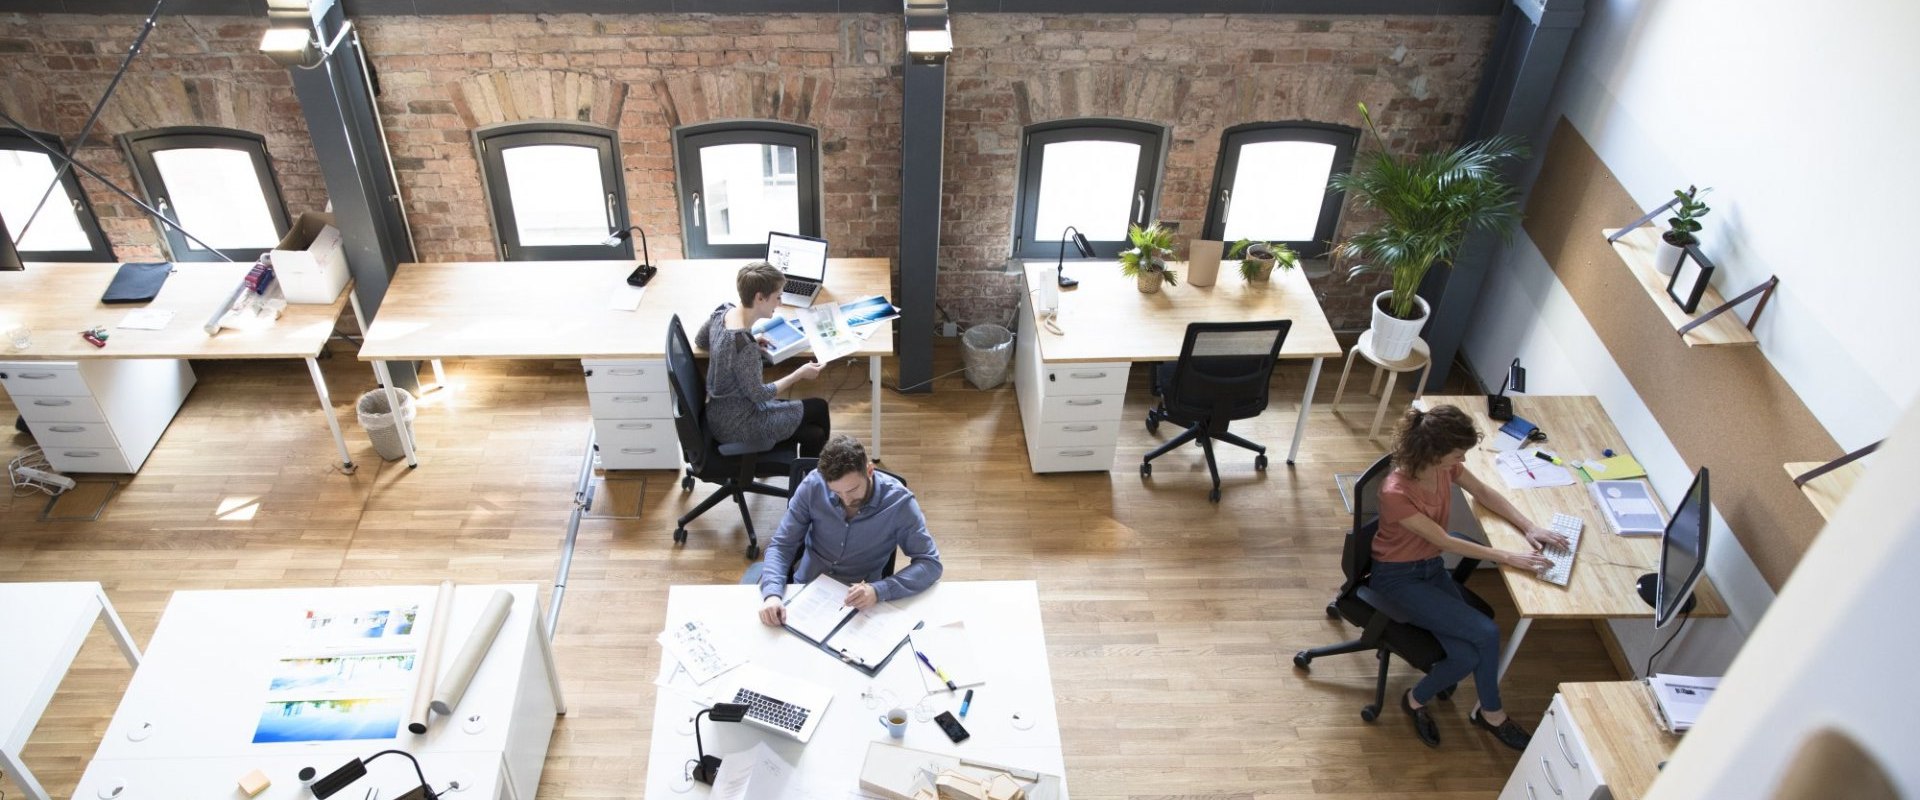 What Additional Services Can You Get with a Co-Working Office Space?